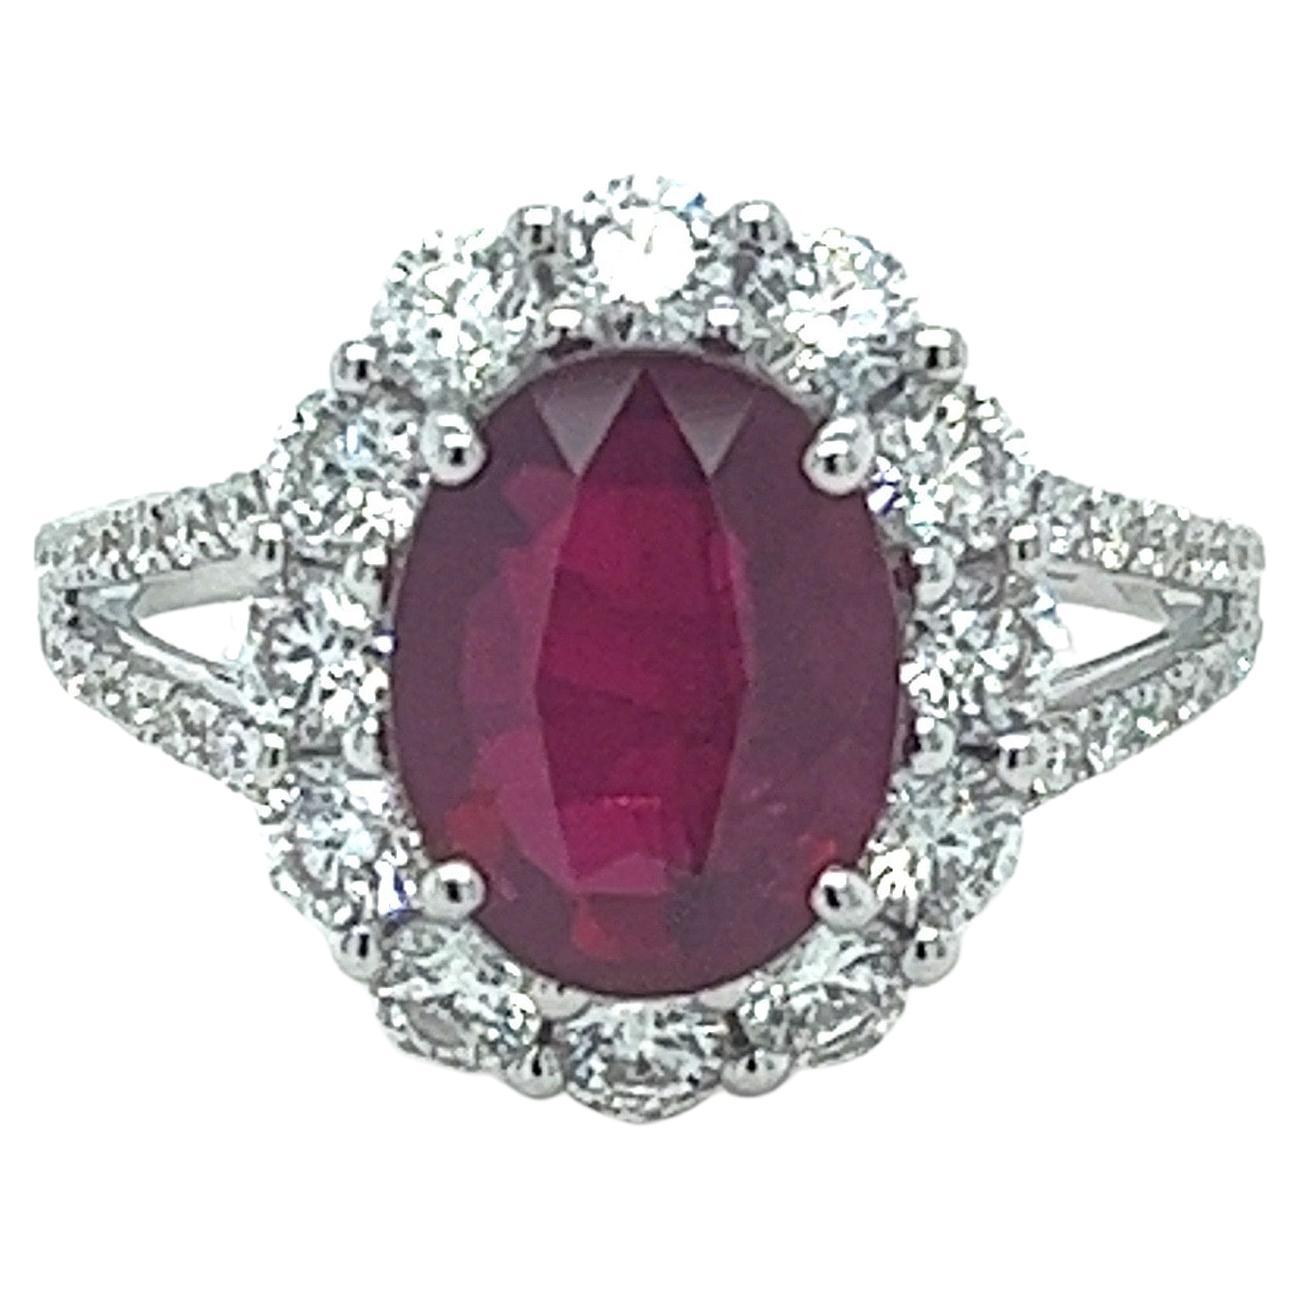 GIA Certified 3.01 Carat Oval Ruby & Diamond Ring in 18 Karat White Gold For Sale